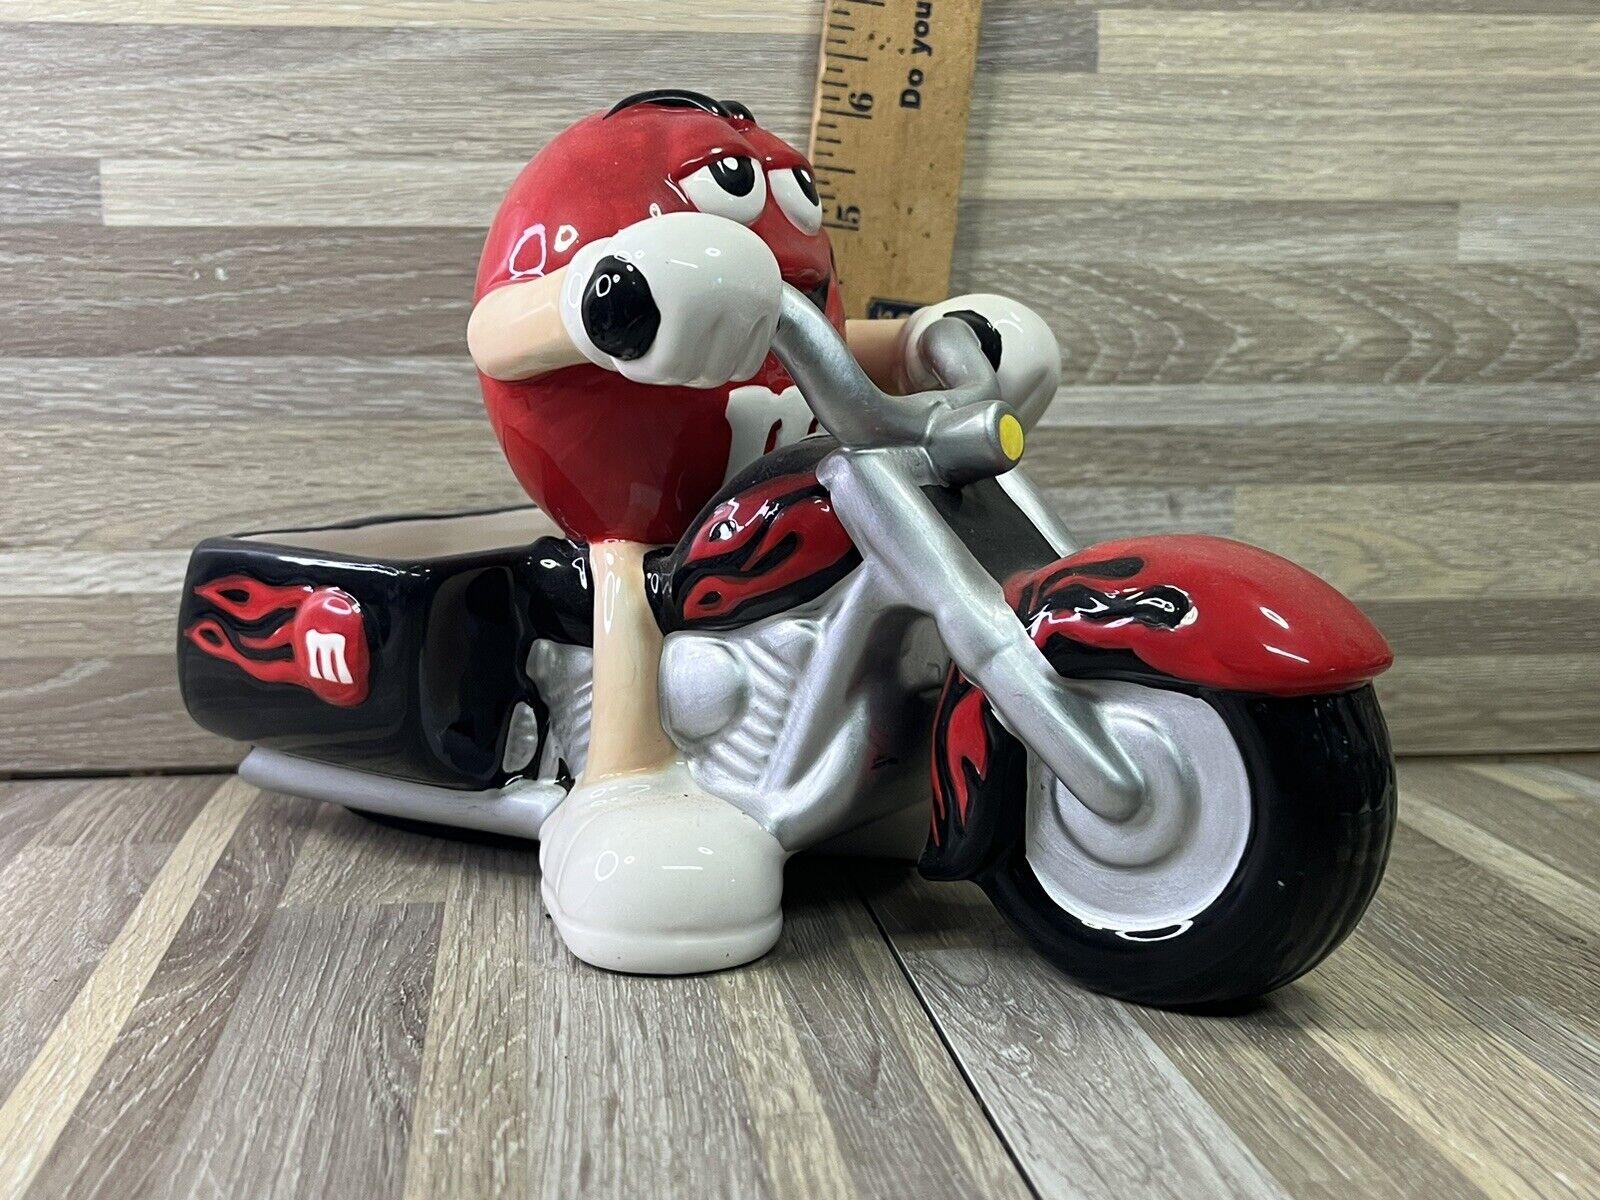 Gallery Red M & M On Motorcycle Ceramic Candy Dish Dispenser